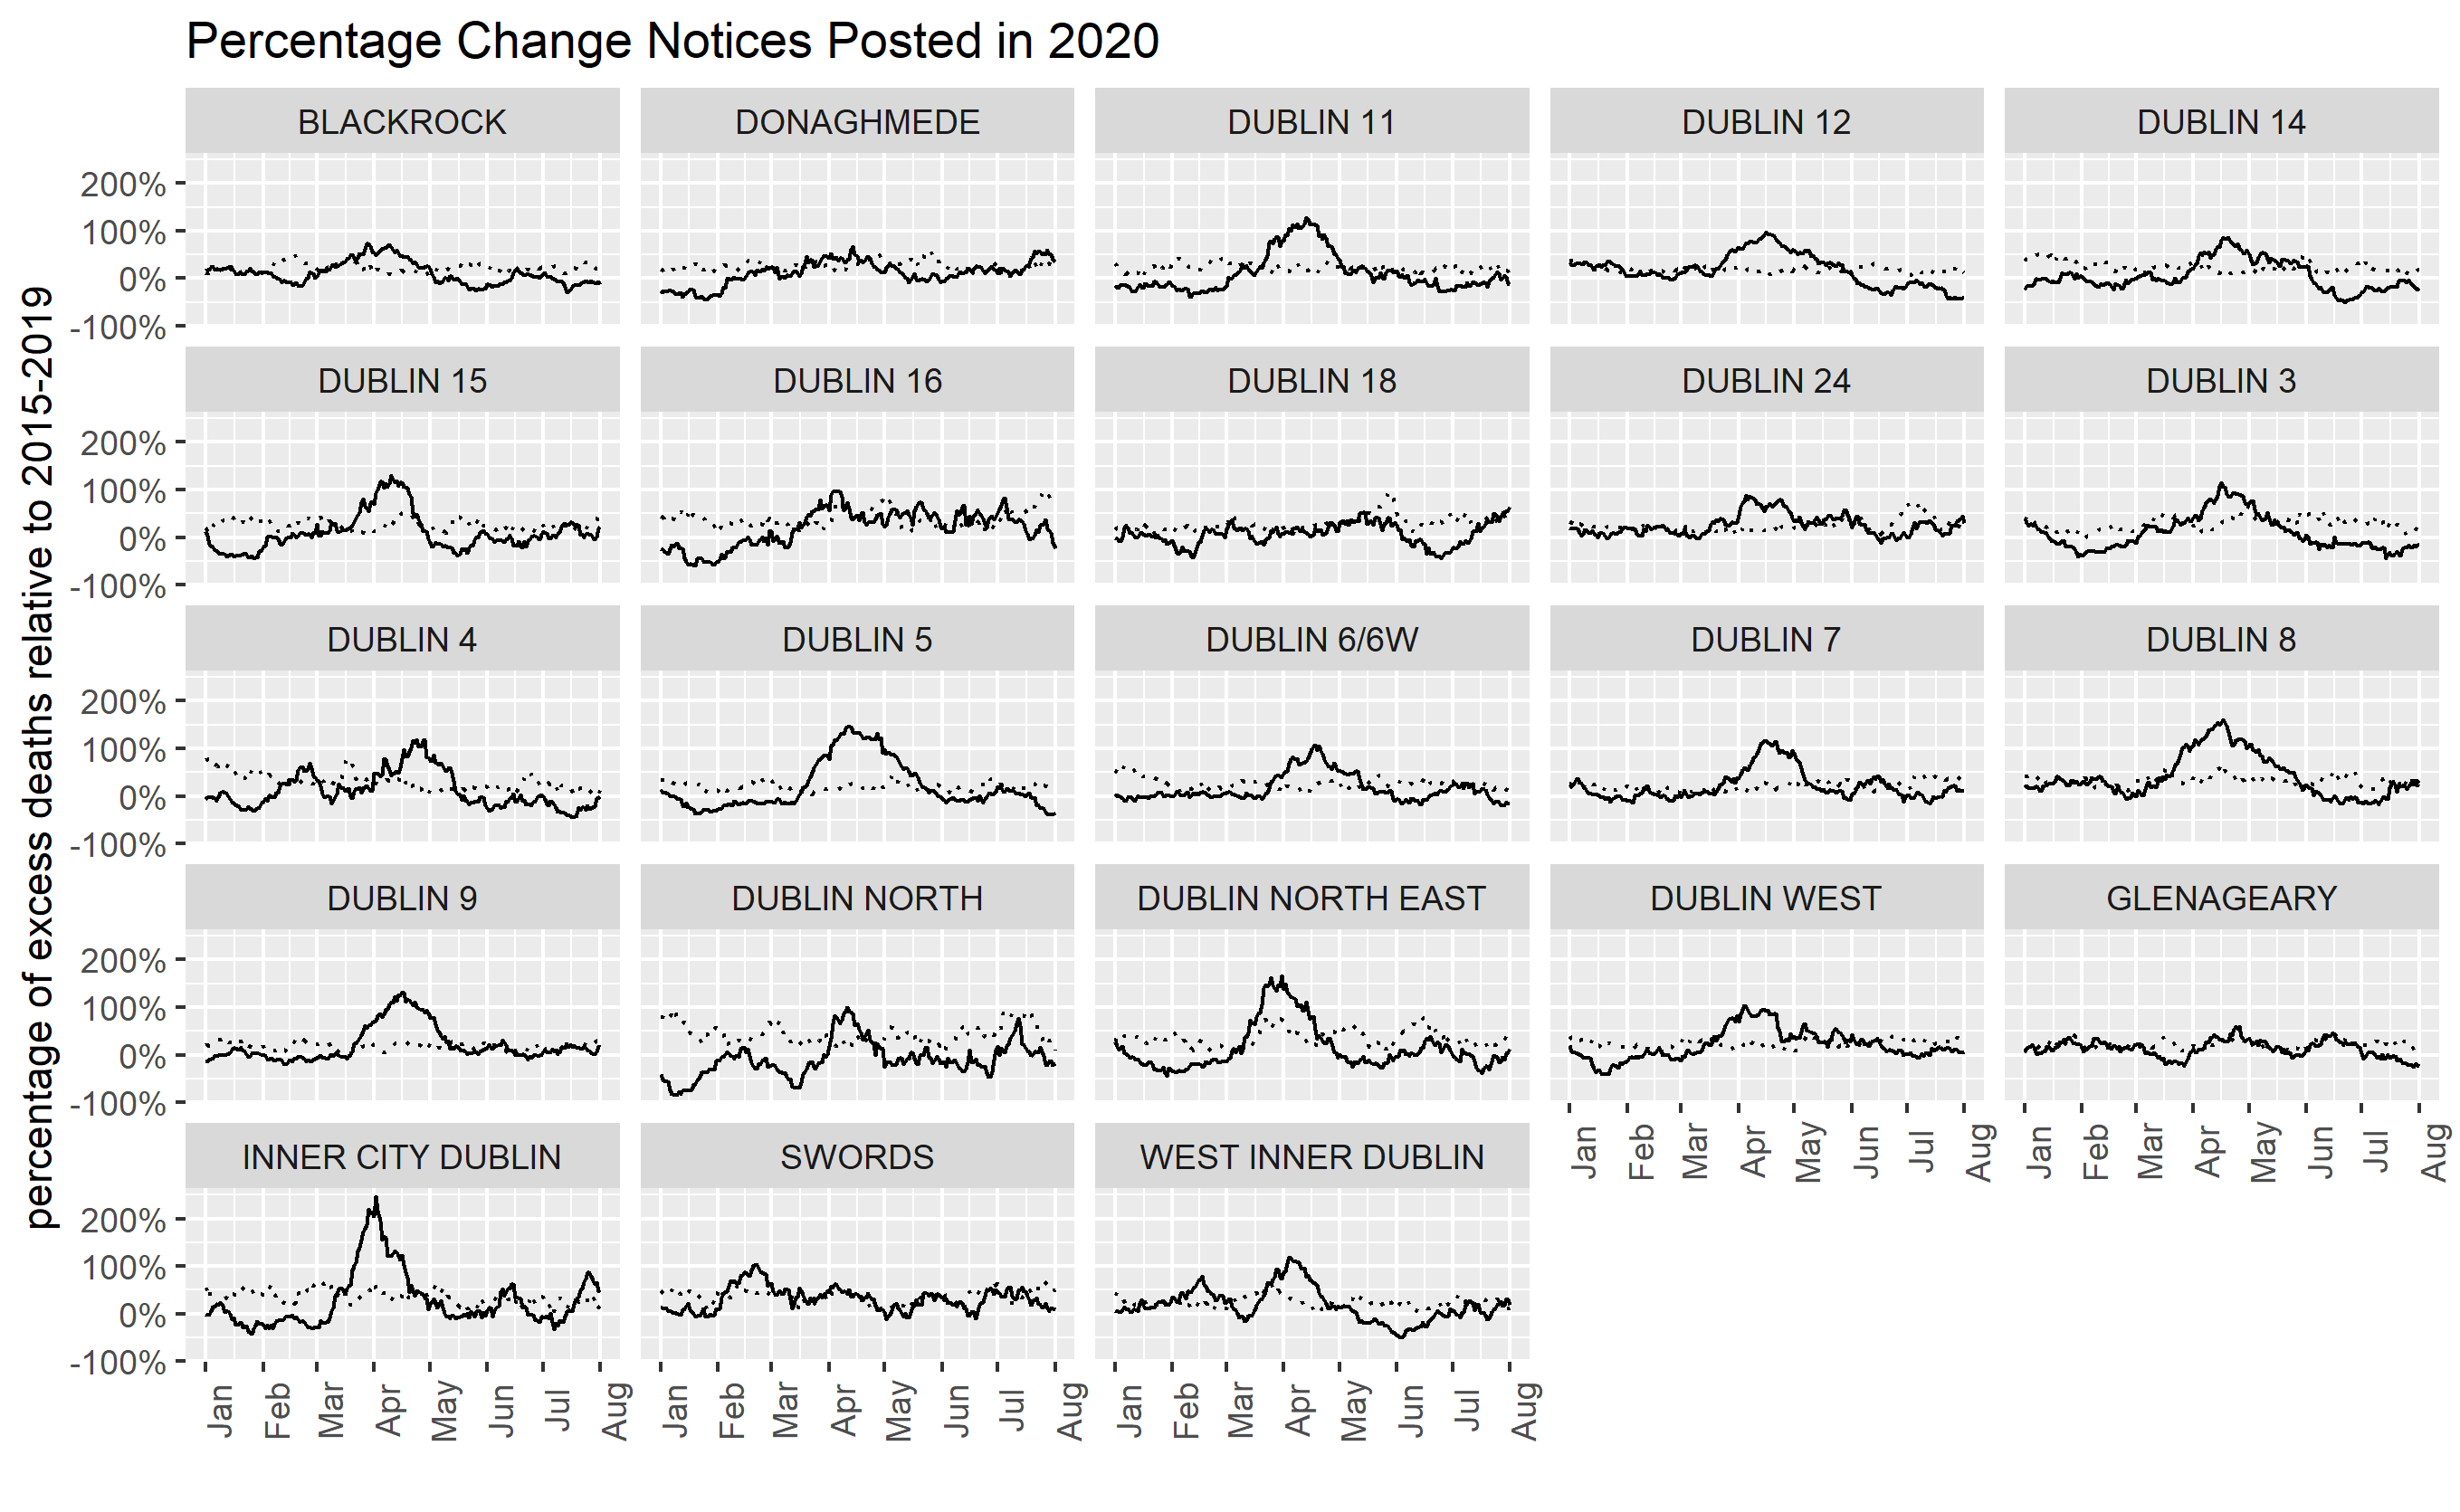 Percentage change in notices posted onto RIP.ie in each Dublin district. Eighteen out of the 23 districts within Dublin showed a peak in excess posting 100% above normal in early 2020, illustrating the effects of Covid-19. The dotted line in each plot represents the previous maximum level of notices posted onto RIP.ie.